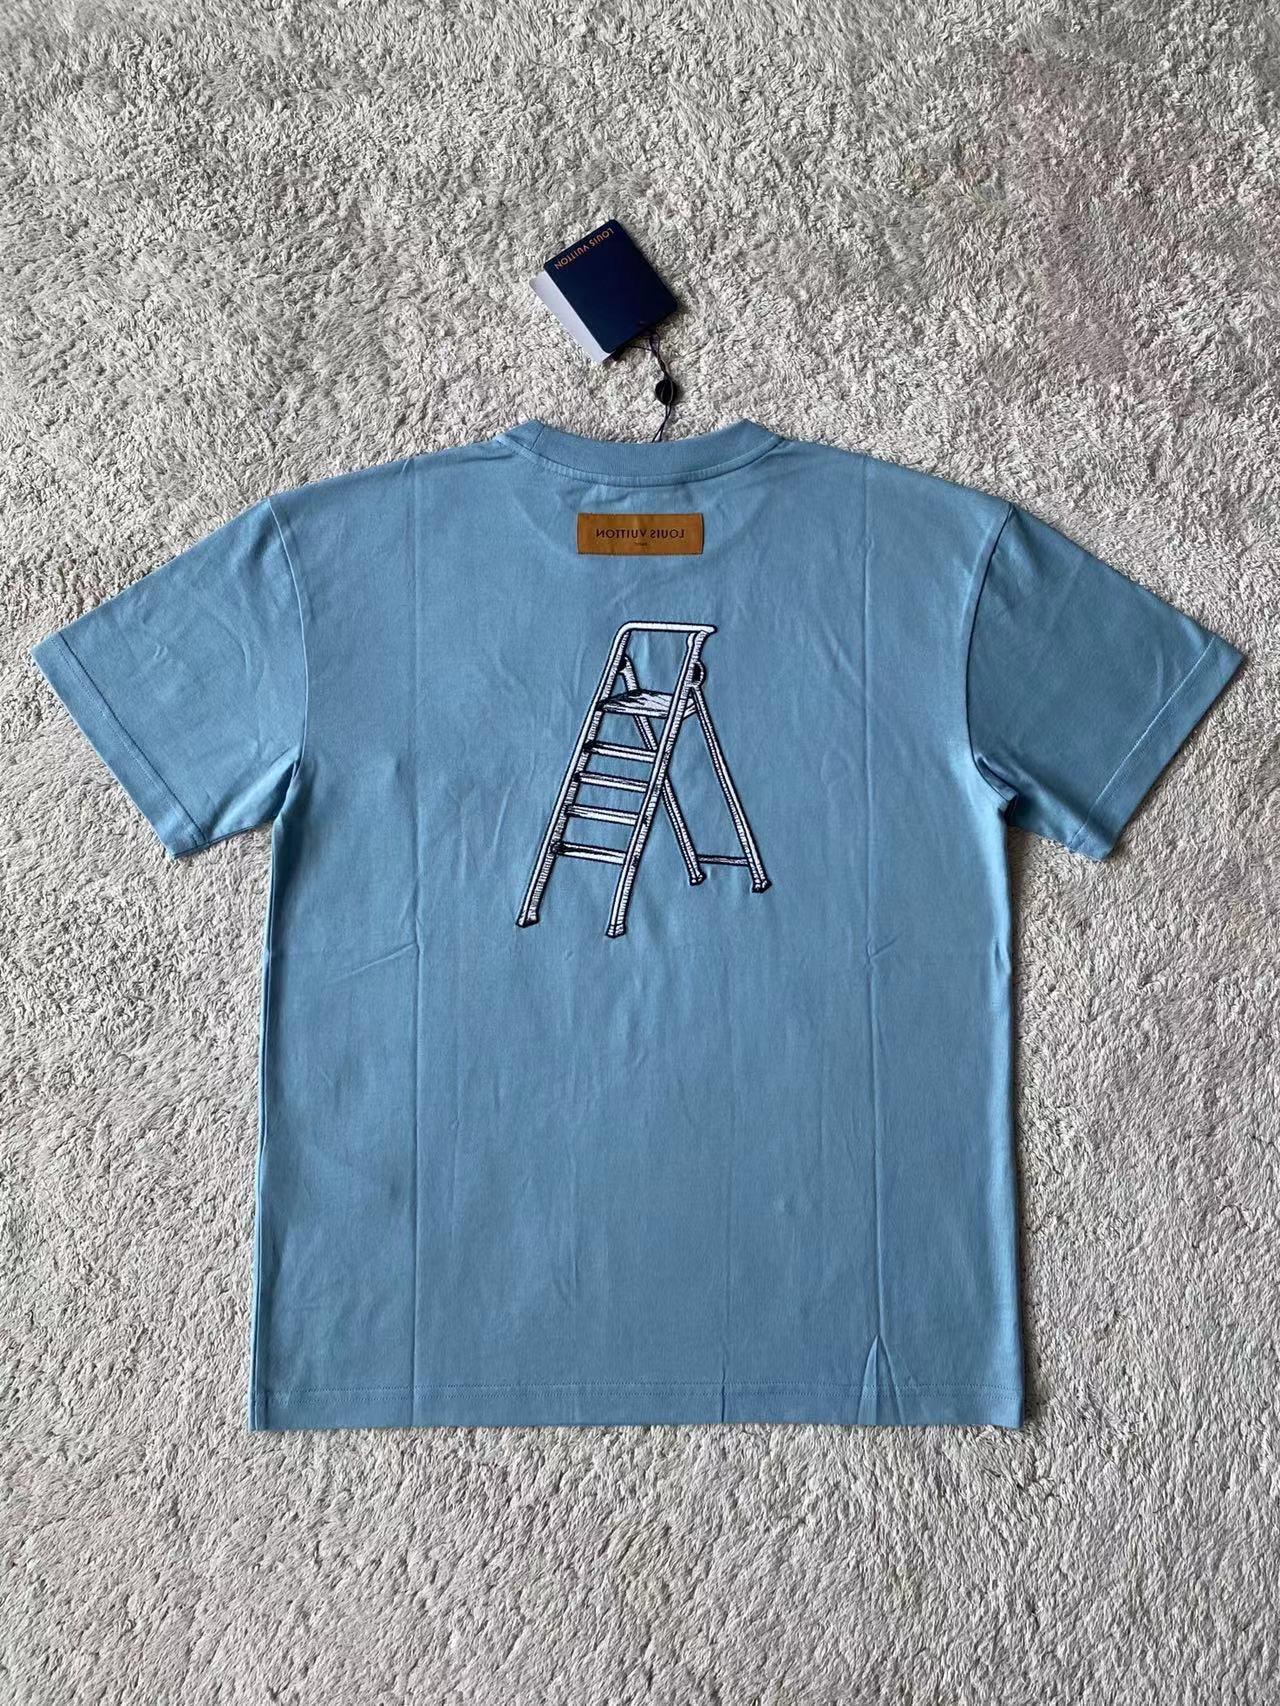 lv-multi-tools-embroidered-t-shirt-6883_16845016323-1000